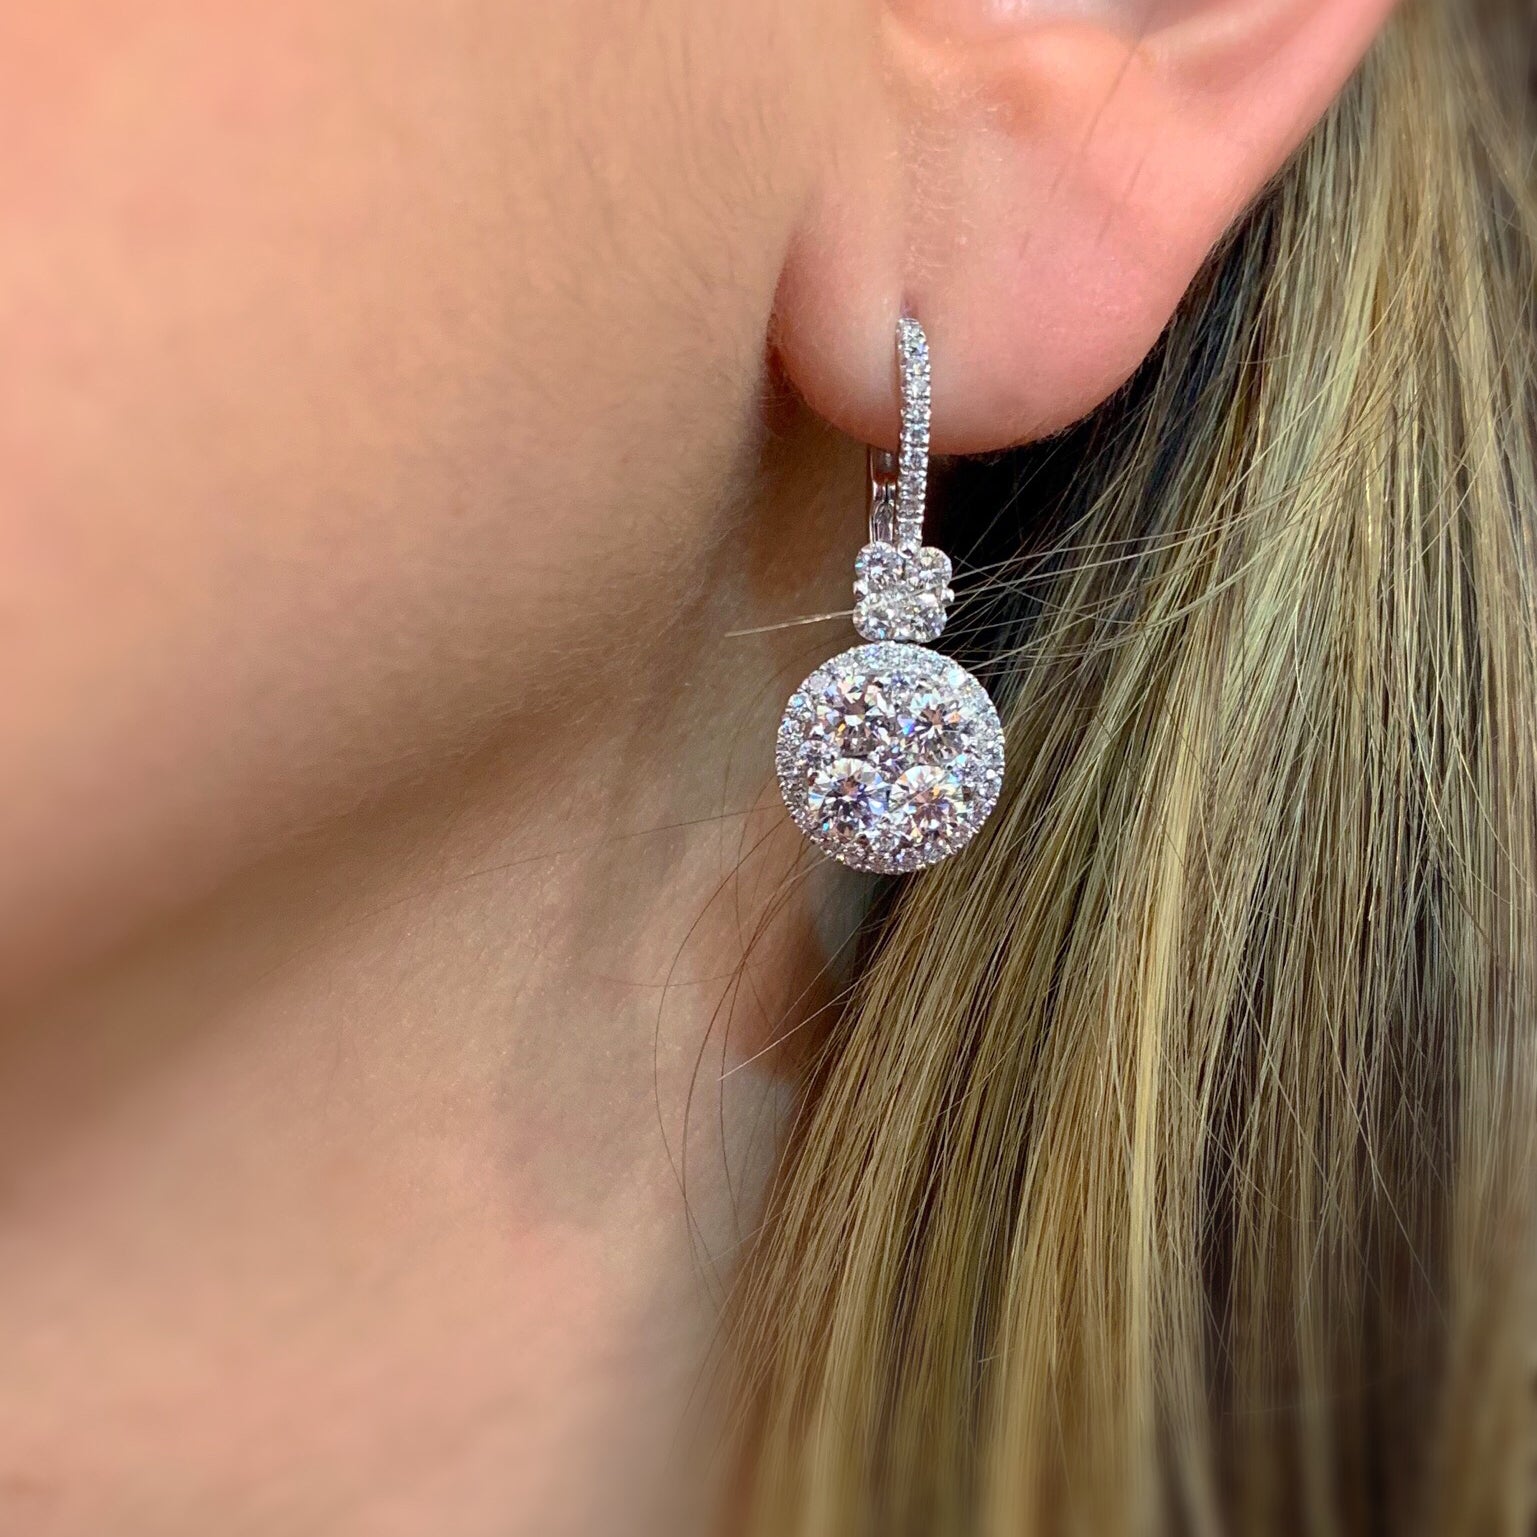 Diamond Cluster Lever-Back Earrings  -18K gold weighing 5.52 grams  -92 round diamonds totaling 3.15 carats  -Lever back